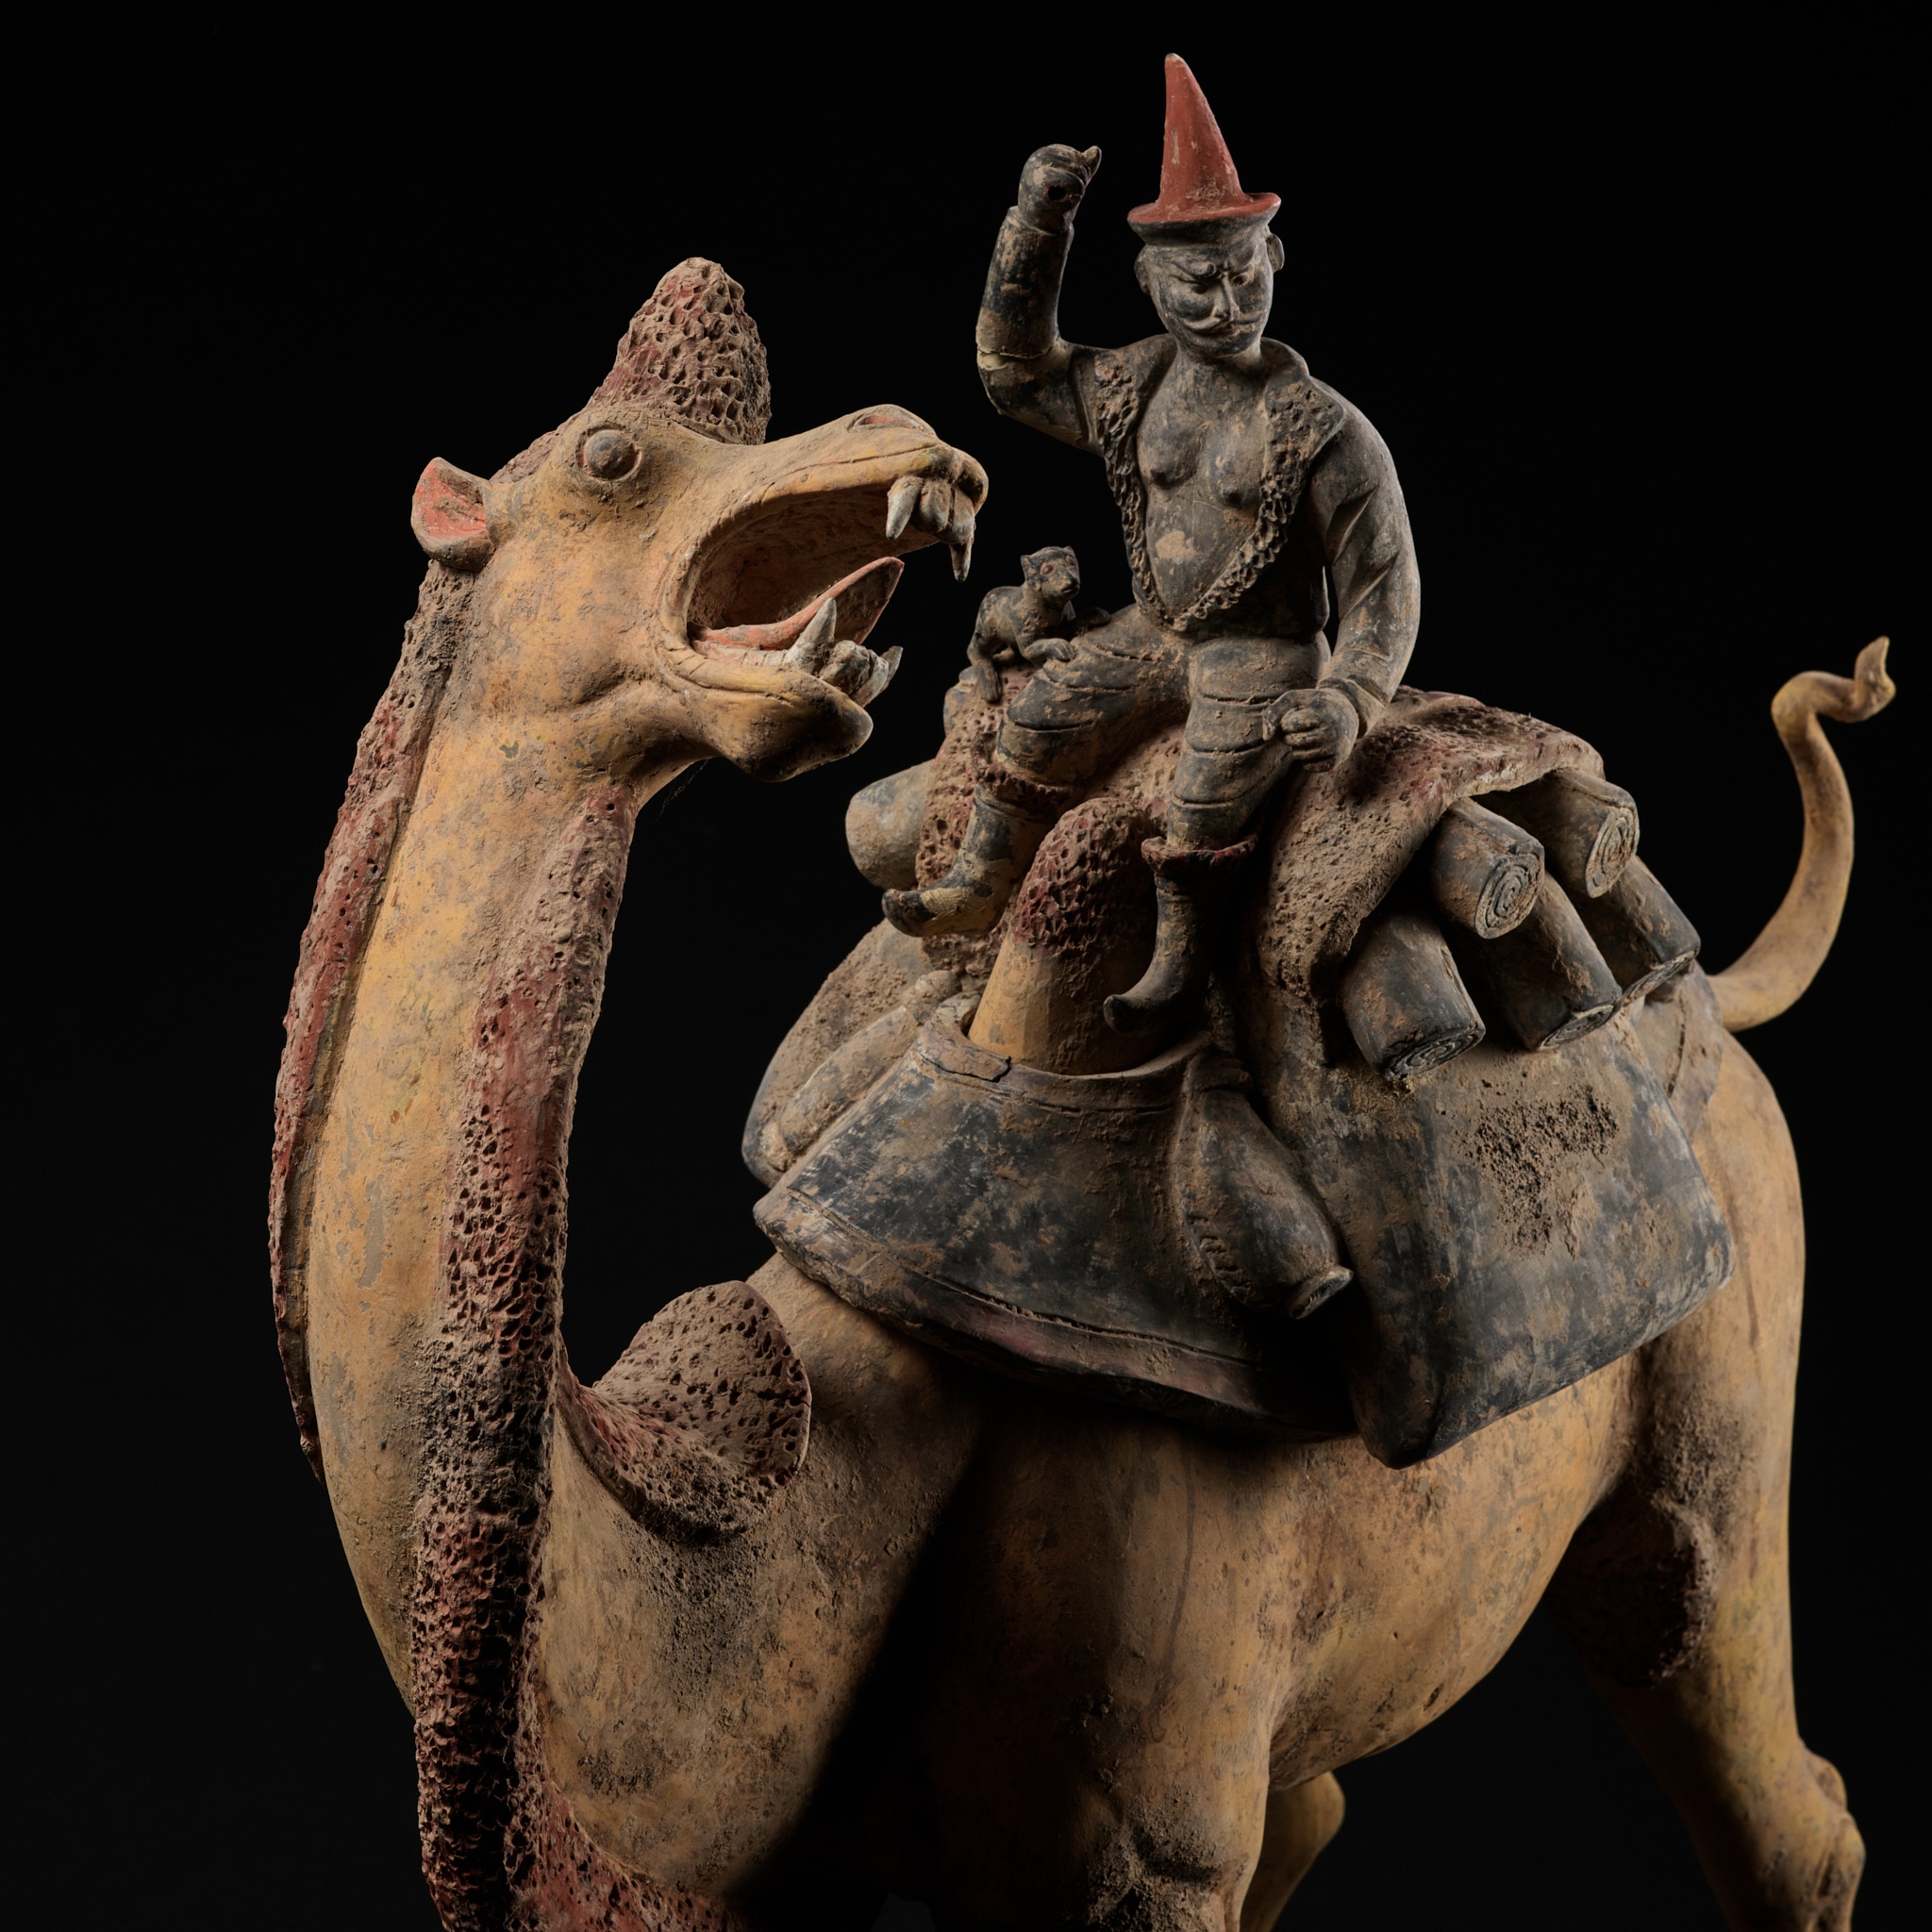 AN EXCEPTIONALLY LARGE PAINTED POTTERY FIGURE OF A BACTRIAN CAMEL AND A SOGDIAN RIDER, TANG DYNASTY